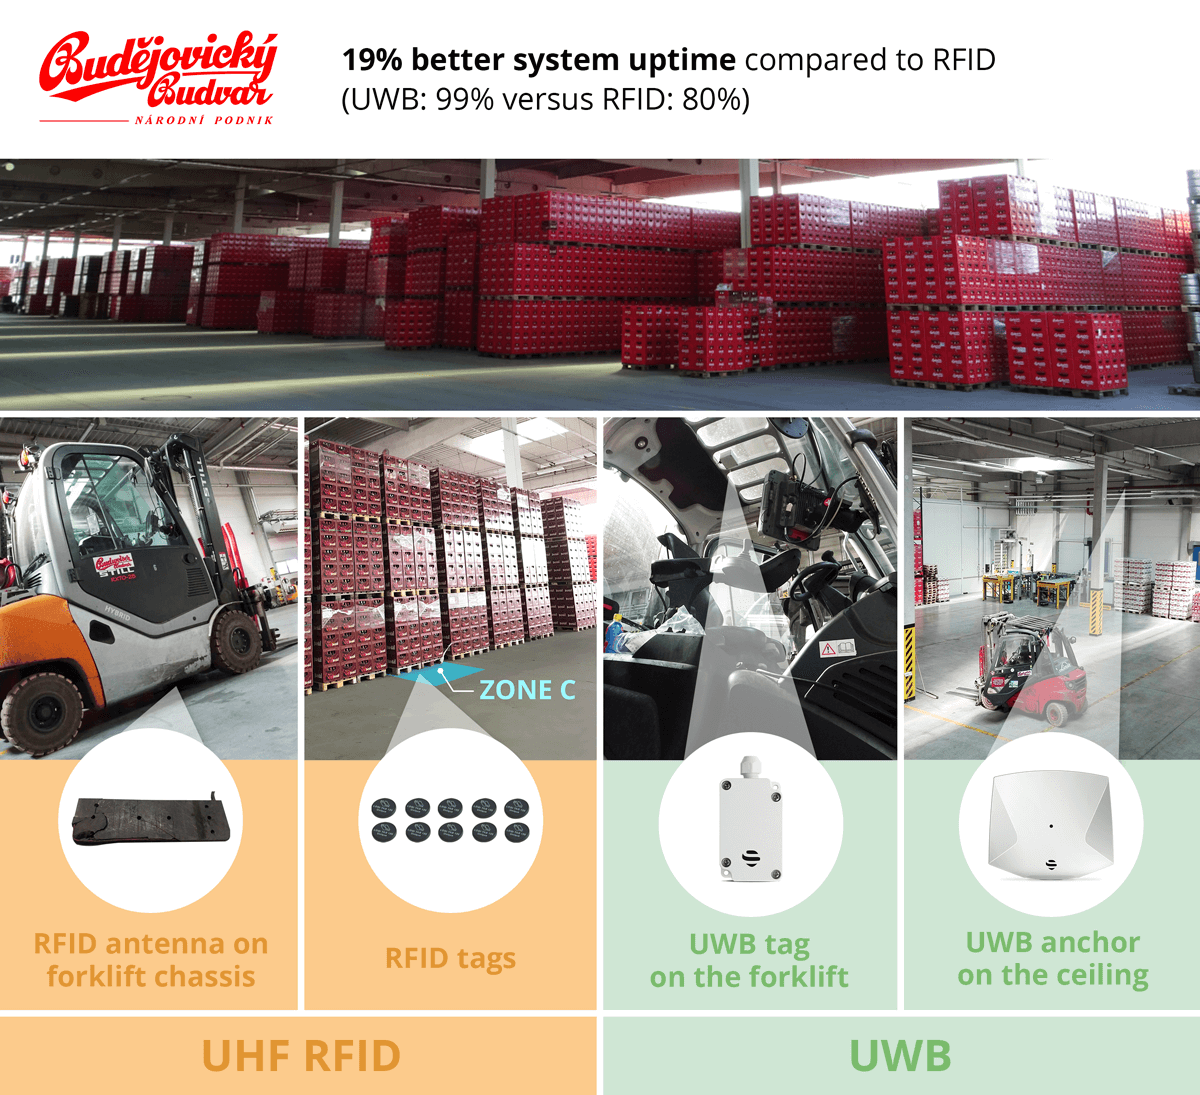 Reliability of UWB RTLS vs UHF RFID for Indoor Tracking